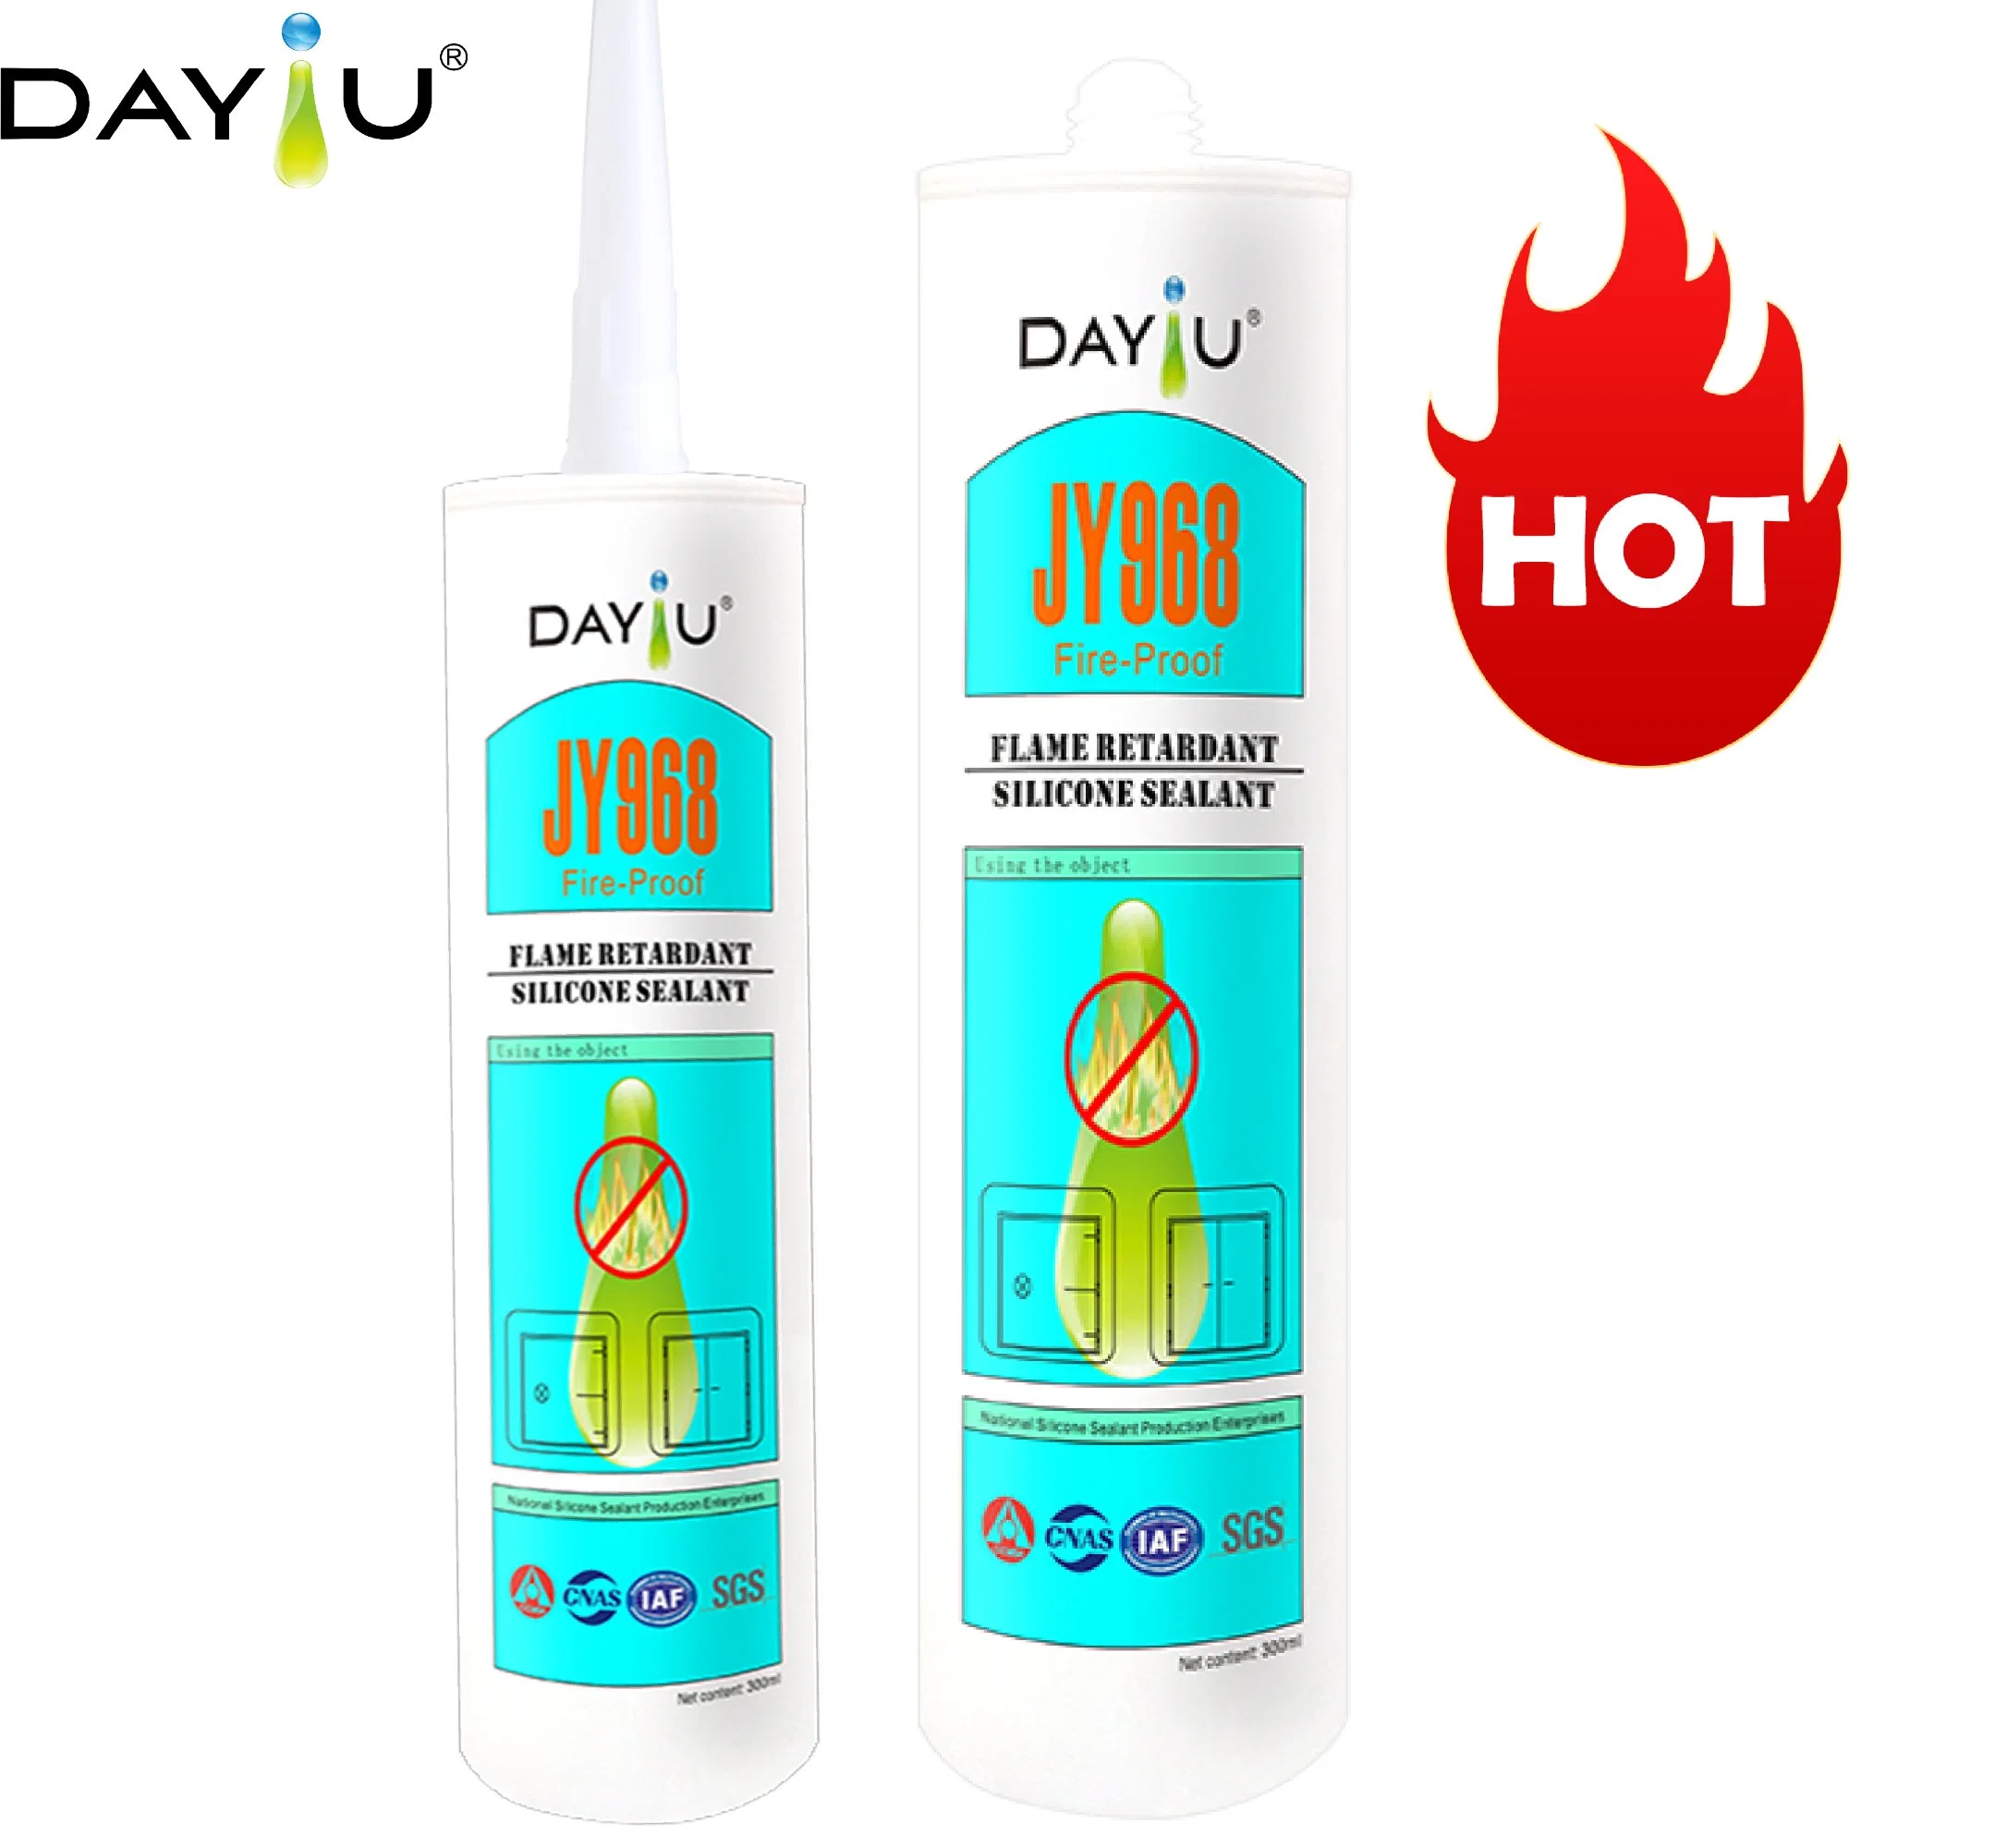 Fire-Proof Silicone Sealant Onsale Jy968 Fire-Proof Silicone Sealant Hotsale